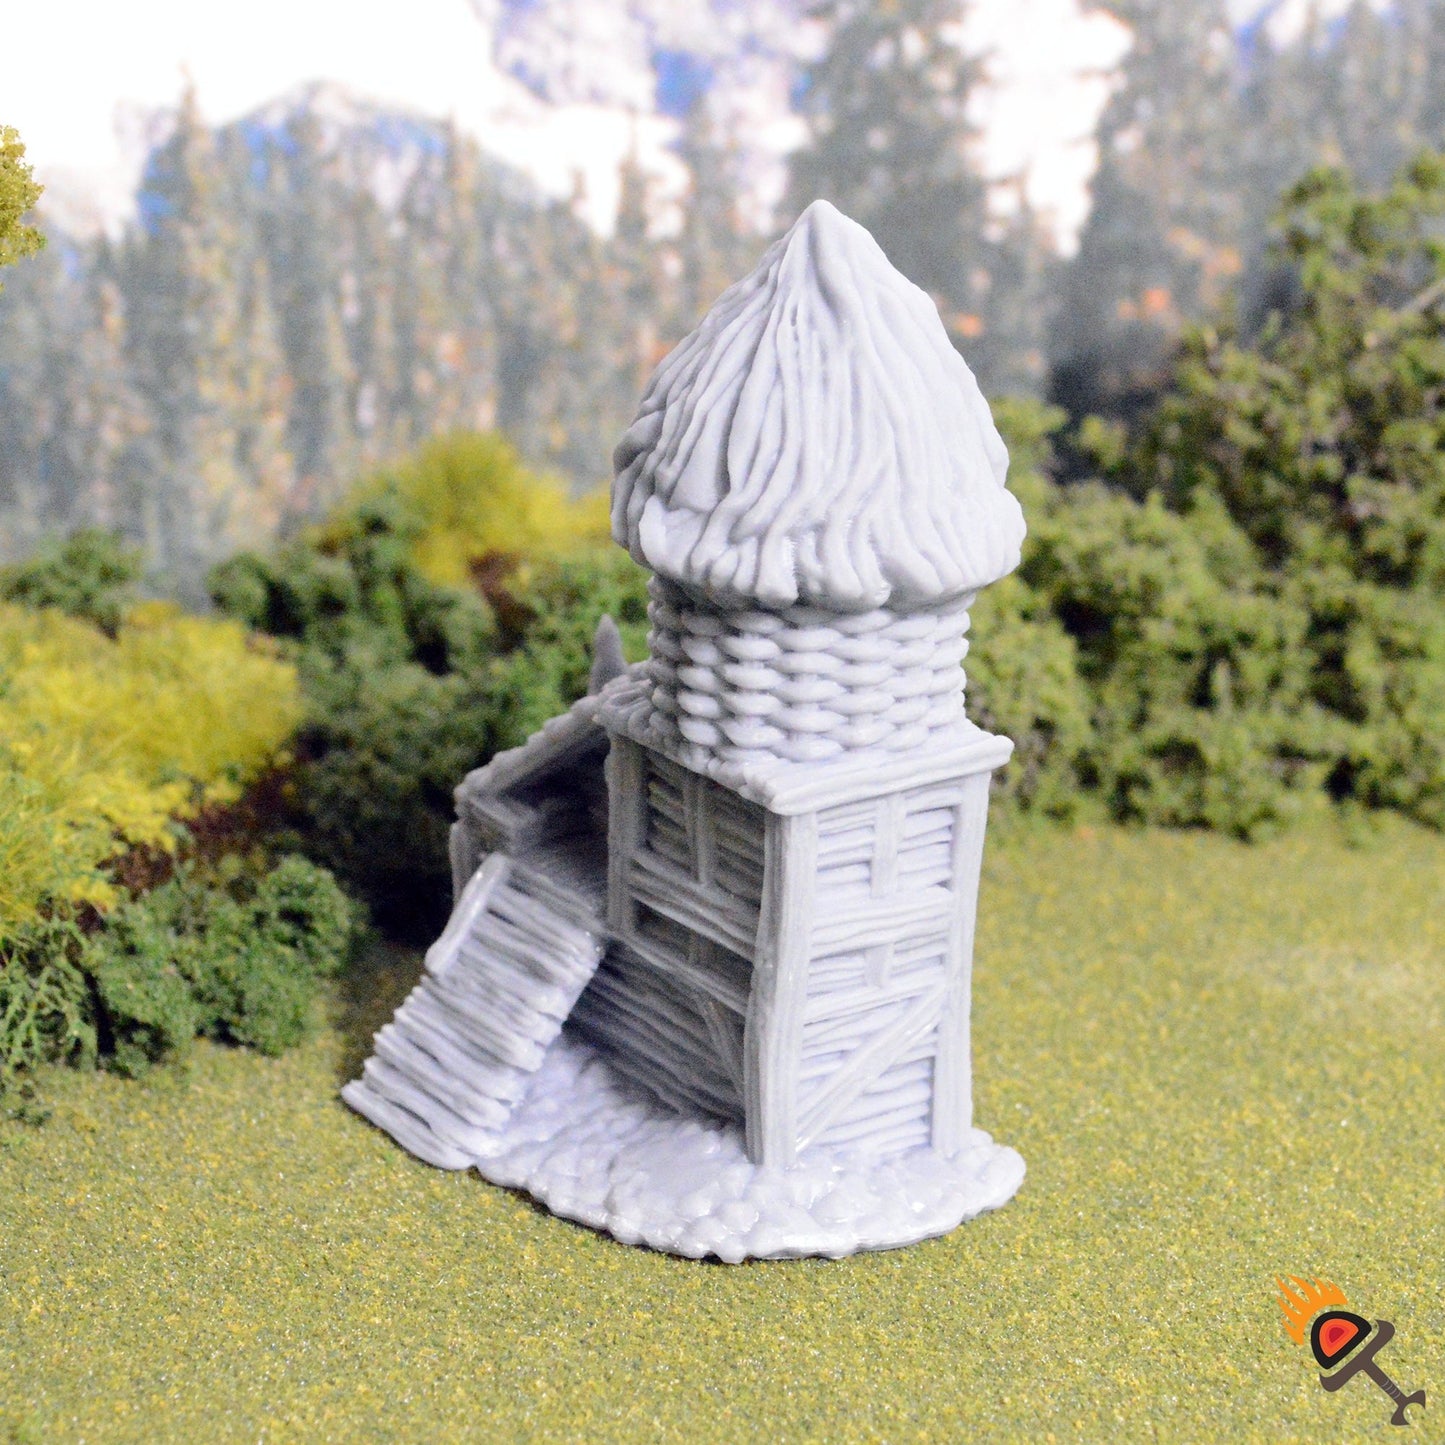 Miniature Chicken Coop with Hens 15mm 28mm 32mm for D&D Terrain, DnD Pathfinder Wargame, Diorama, Hens Tower, Hagglethorn Hollow